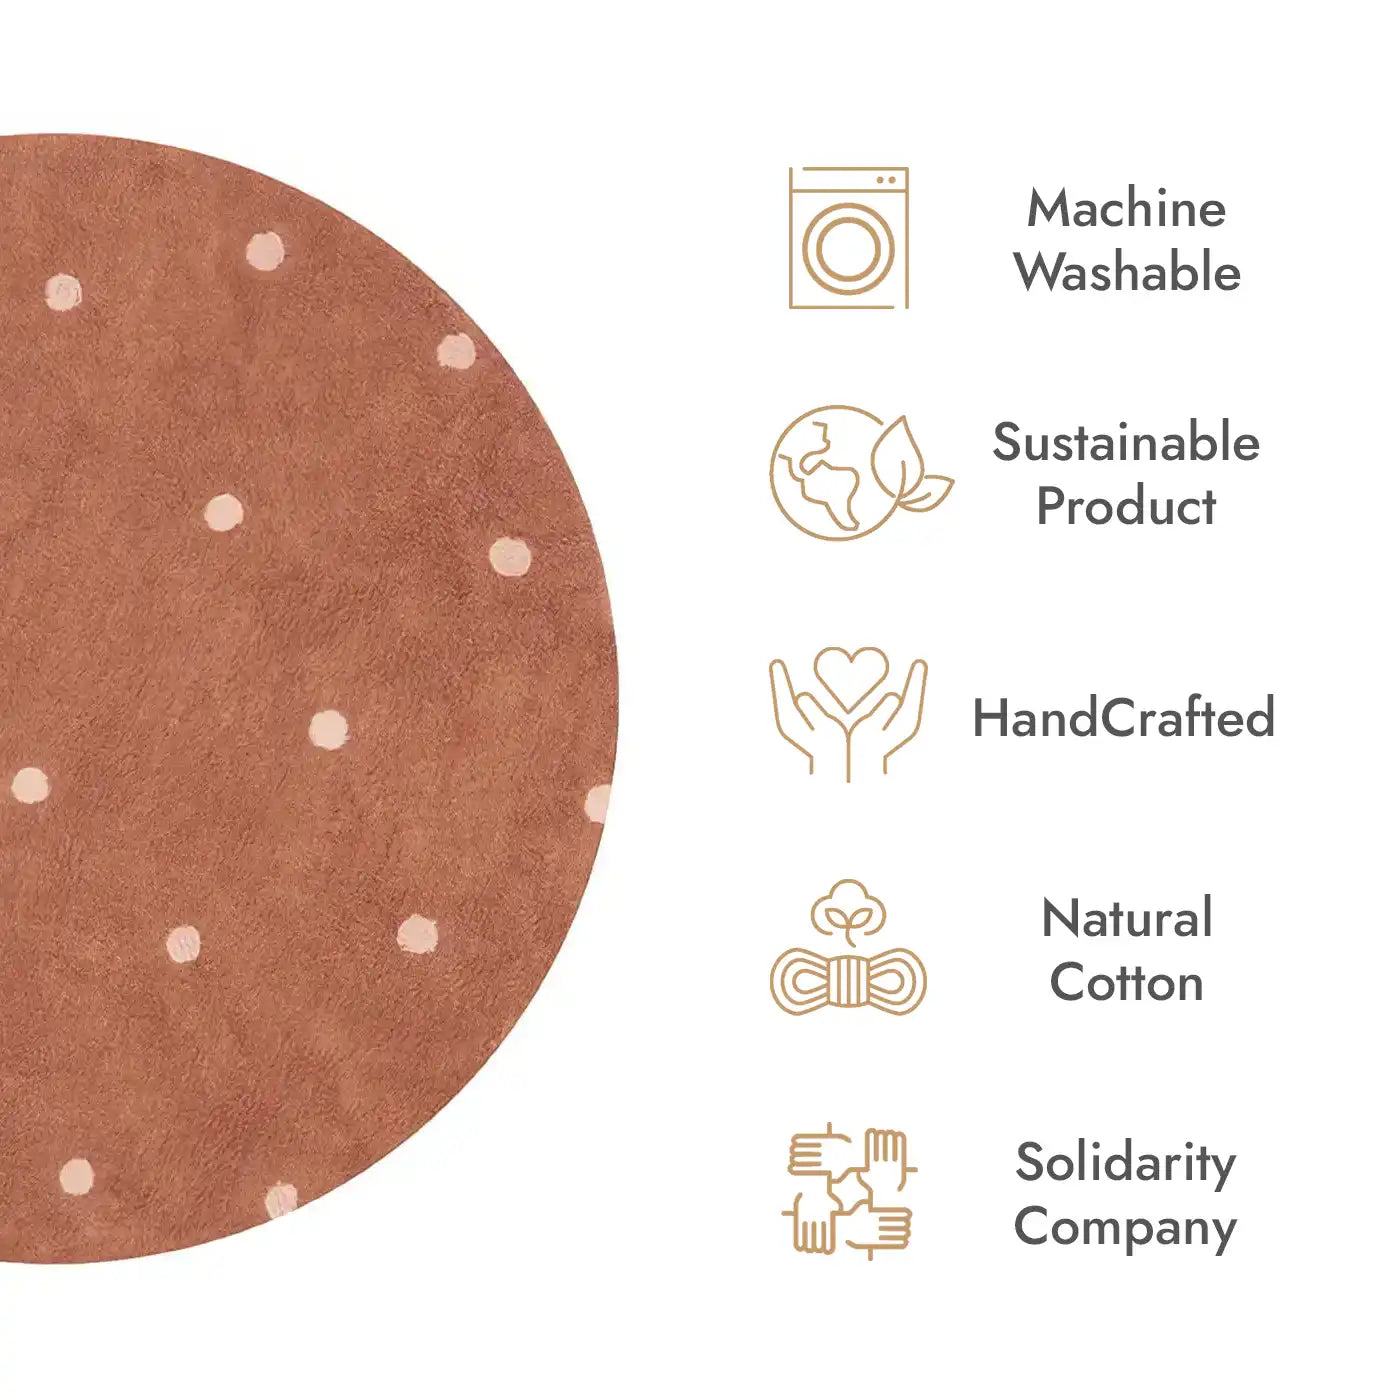 Lorena Canals Round Dot Washable Rug - Chestnut (Mushroom hunters / Forest finds Collection)